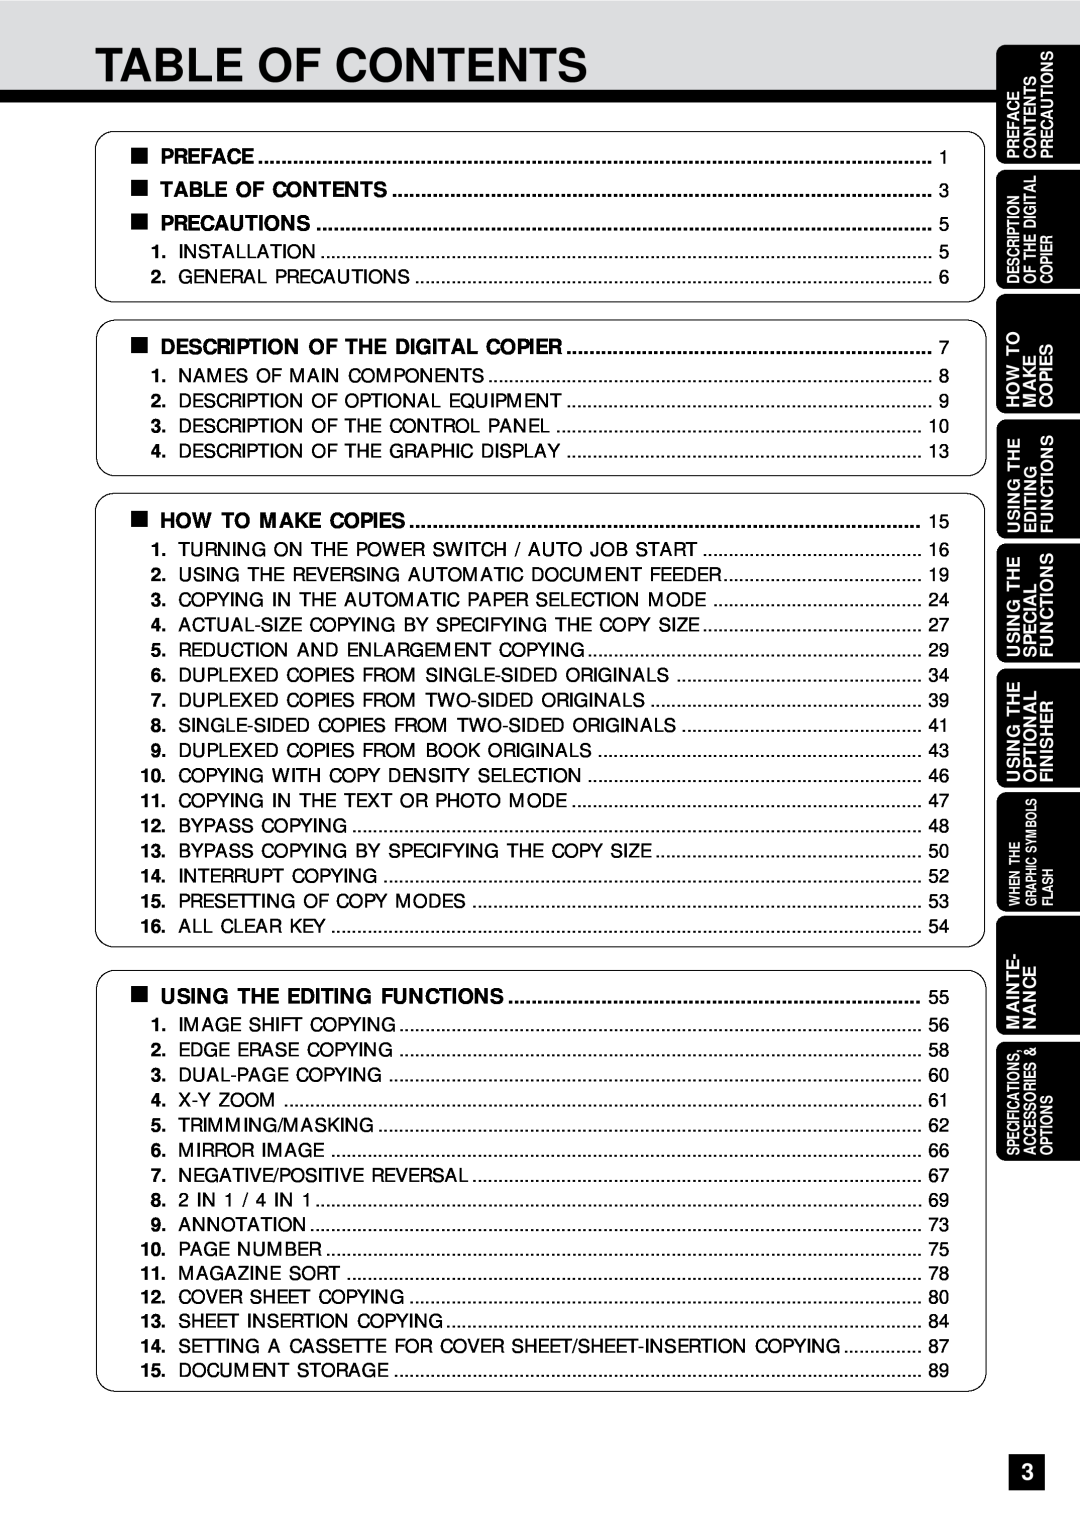 Sharp AR-650 Table Of Contents, Using The Editing Functions, Preface, Precautions, Description Of The Digital Copier 